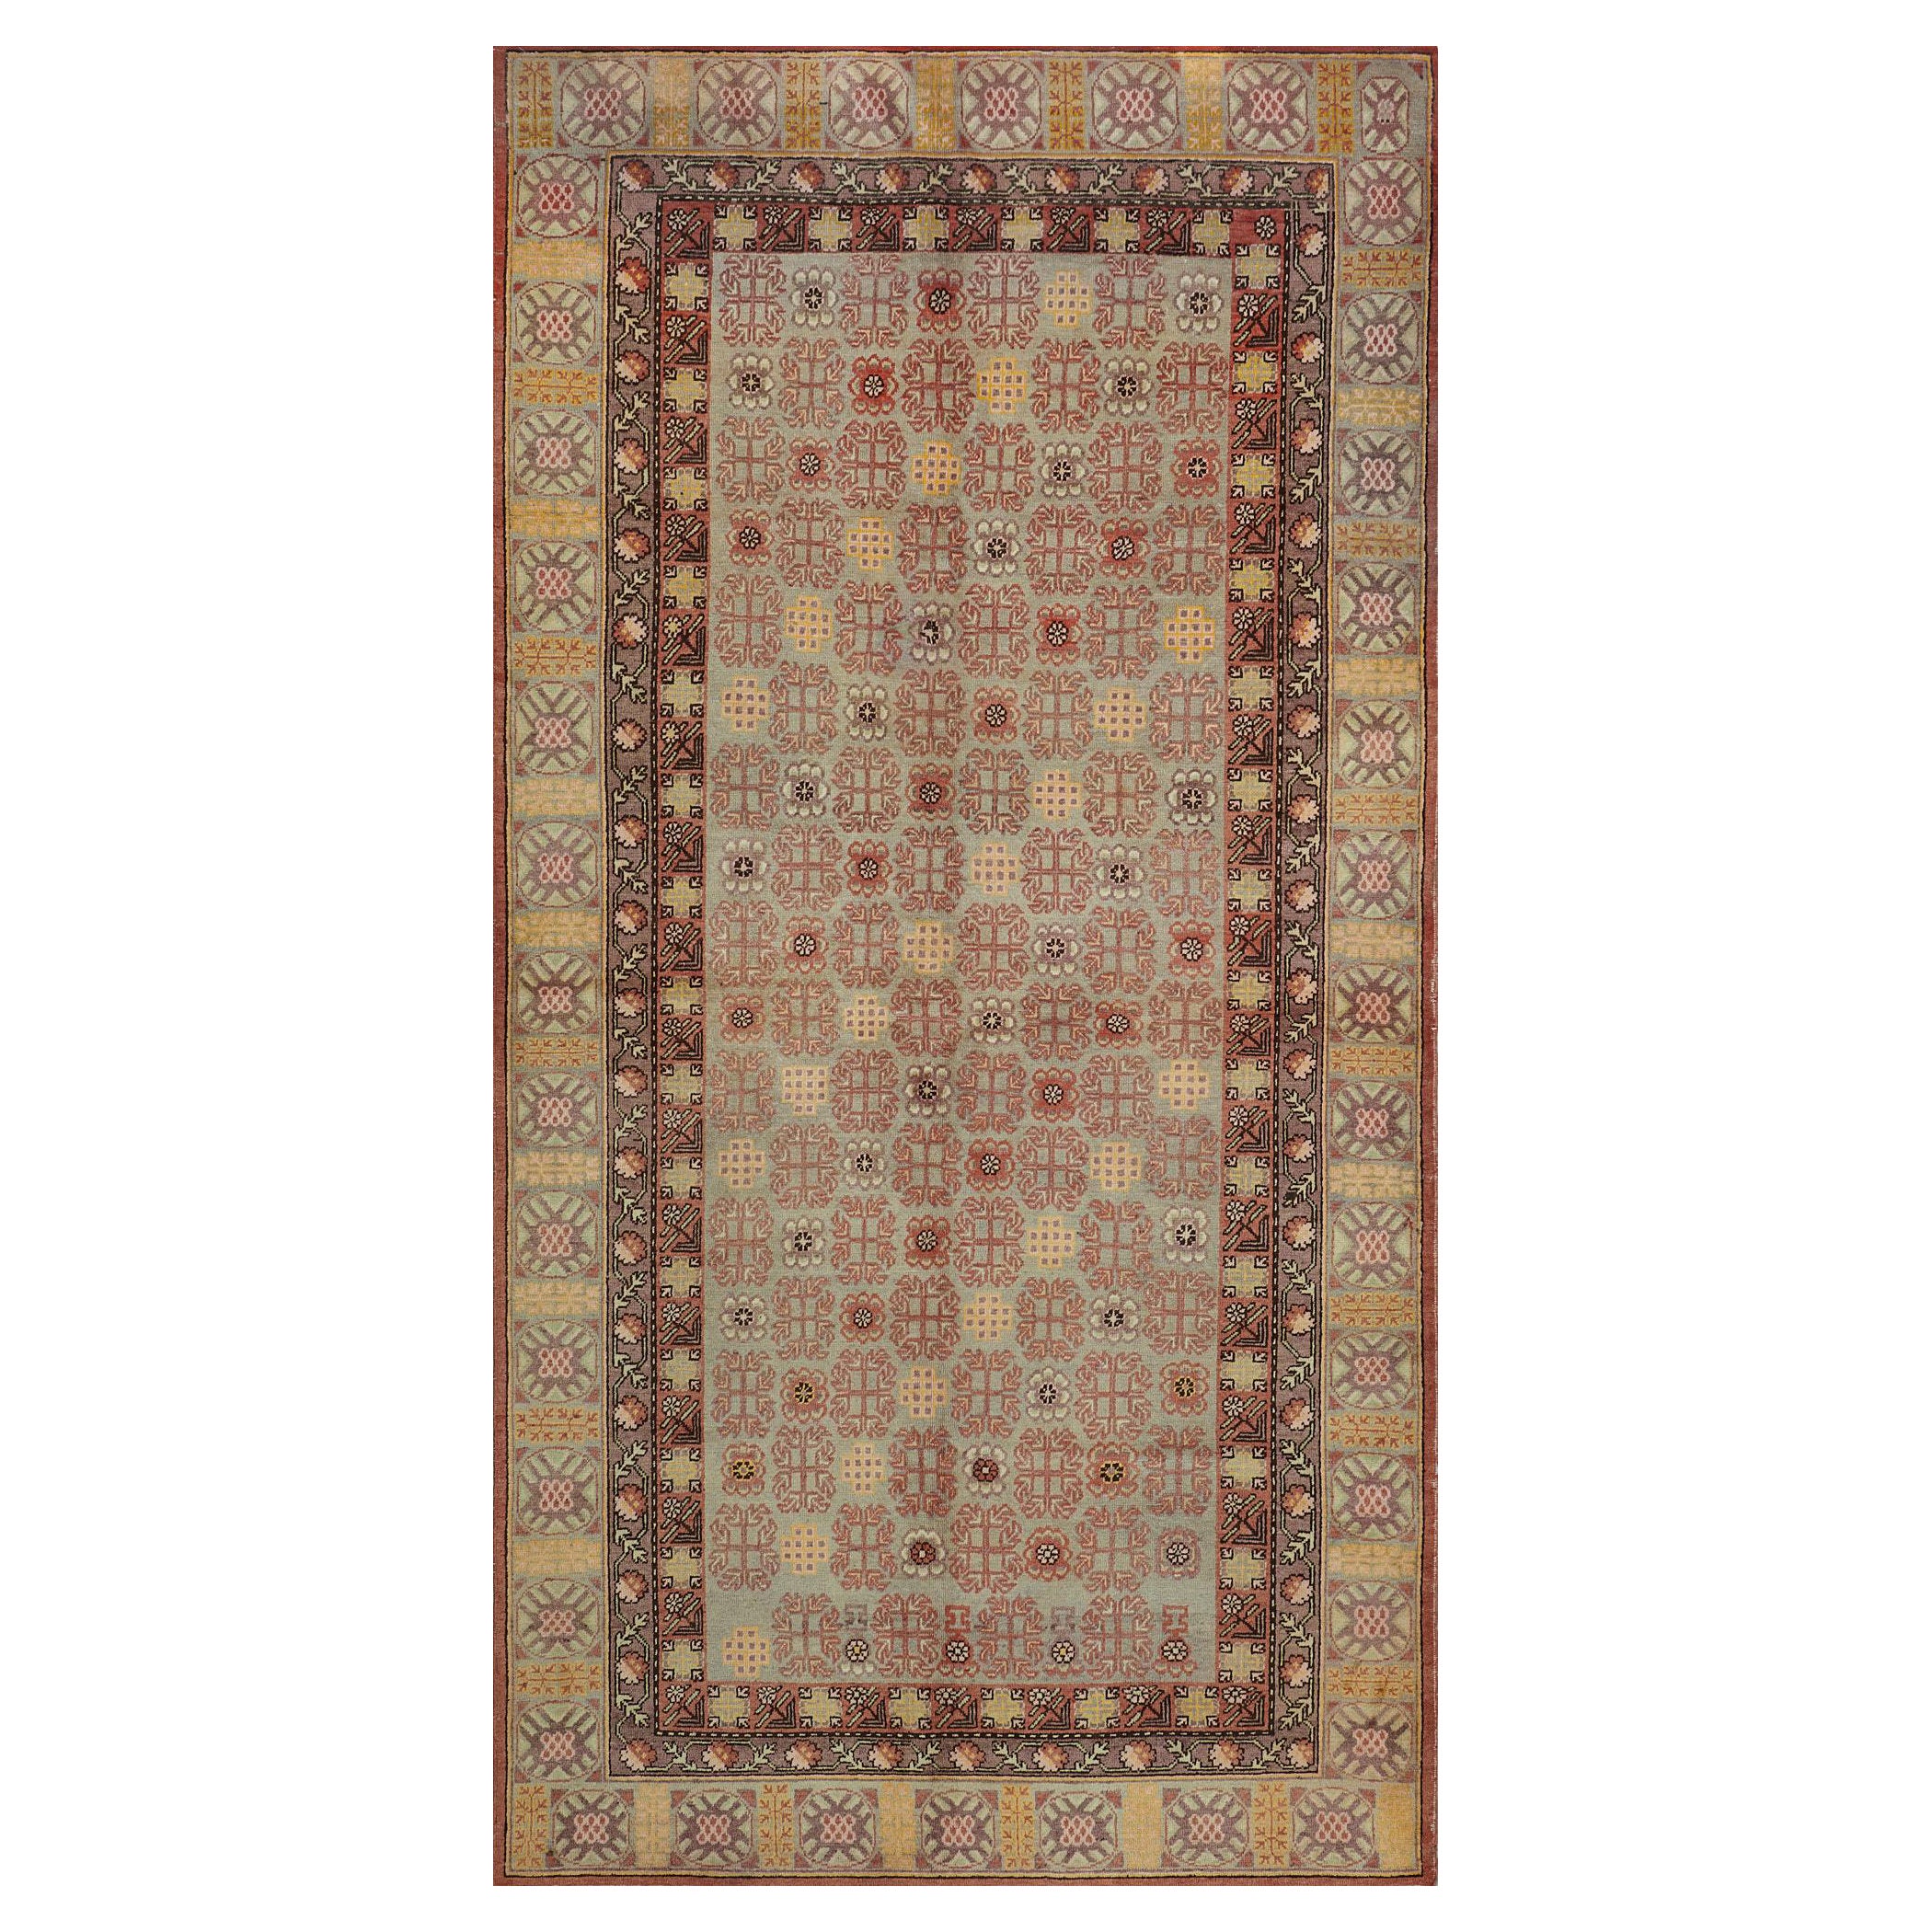 Antique Hand Knotted Wool Khotan Rug